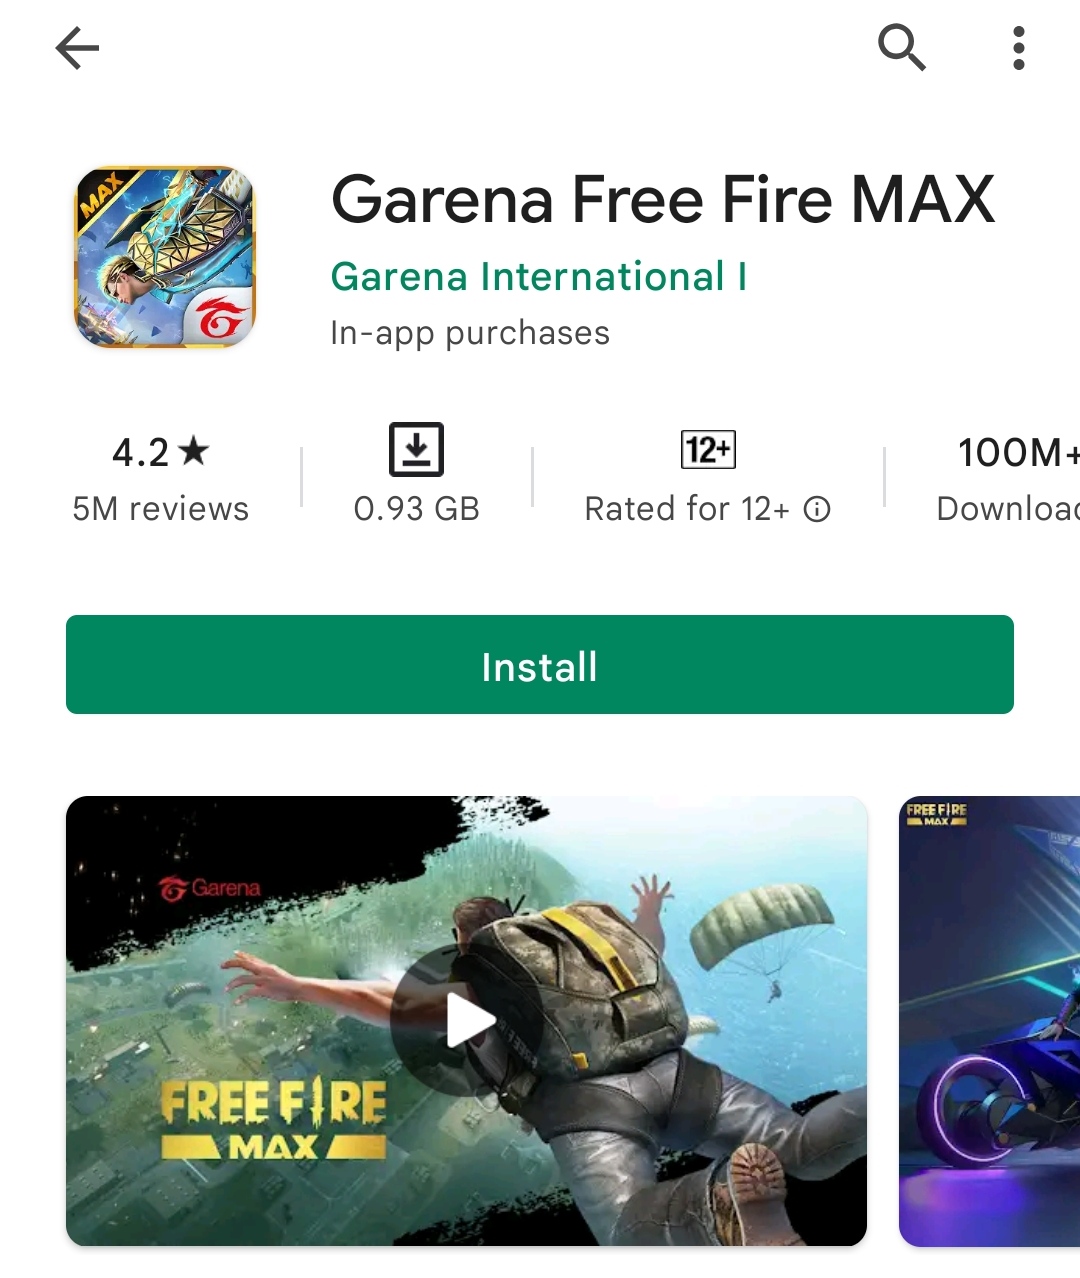 Is Free Fire MAX banned in App Store?